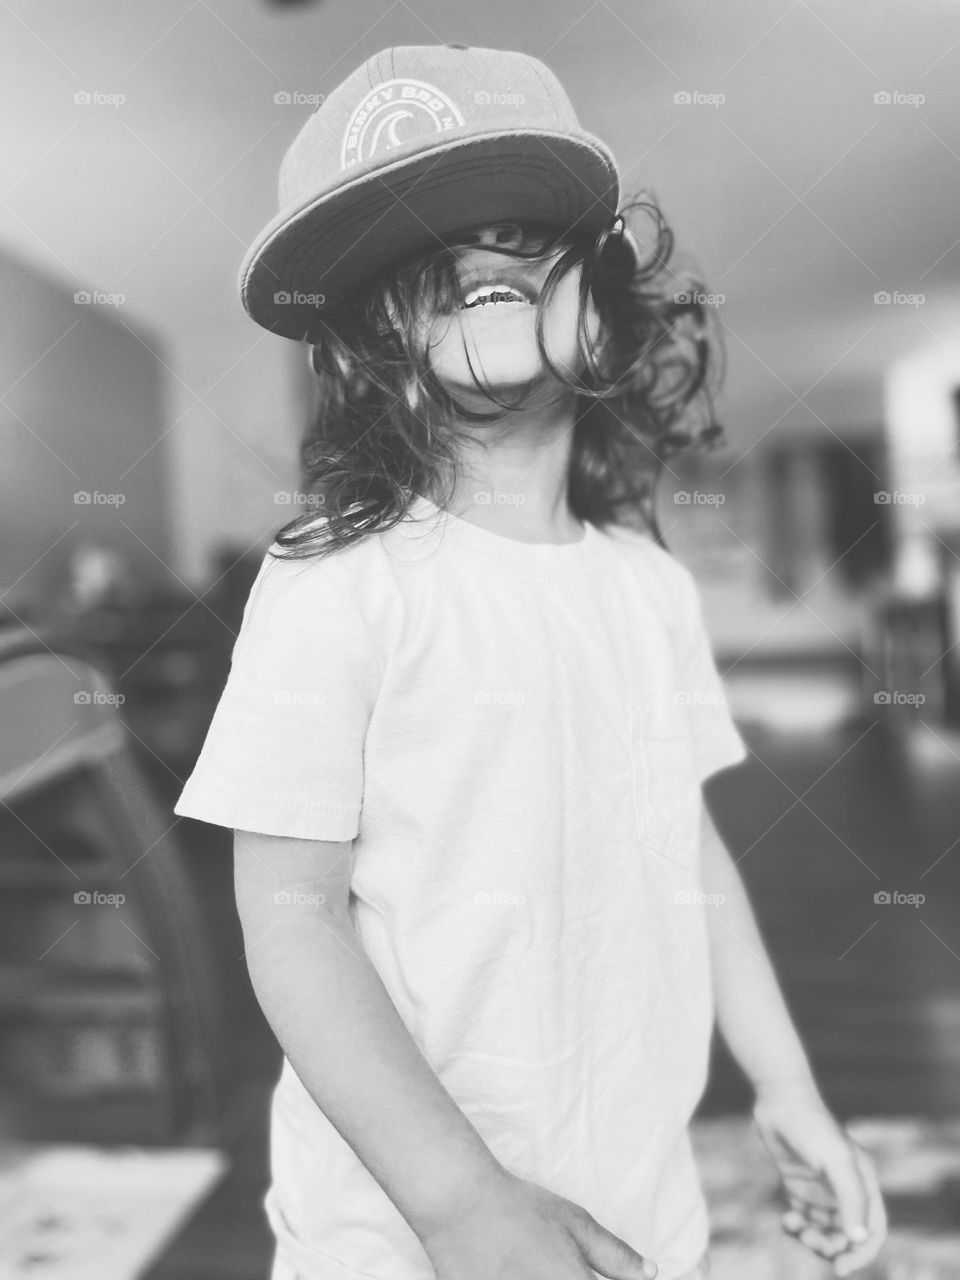 Toddler girl acts silly, toddler has fun with hat, the joy of children, black and white portrait of a child 